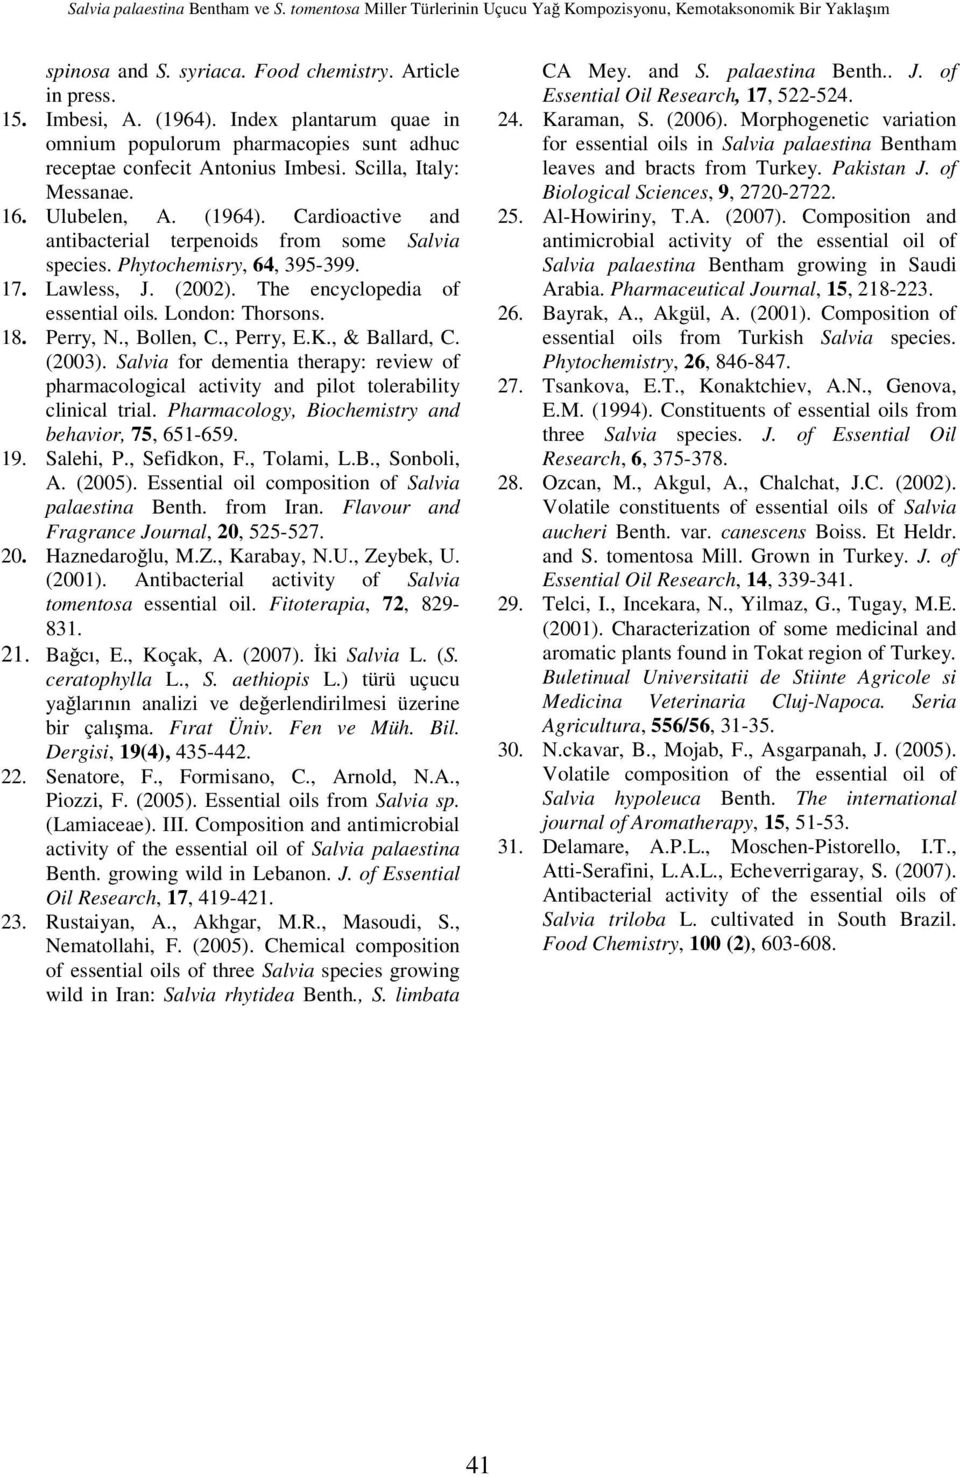 Cardioactive and antibacterial terpenoids from some Salvia species. Phytochemisry, 64, 395-399. 17. Lawless, J. (2002). The encyclopedia of essential oils. London: Thorsons. 18. Perry, N., Bollen, C.